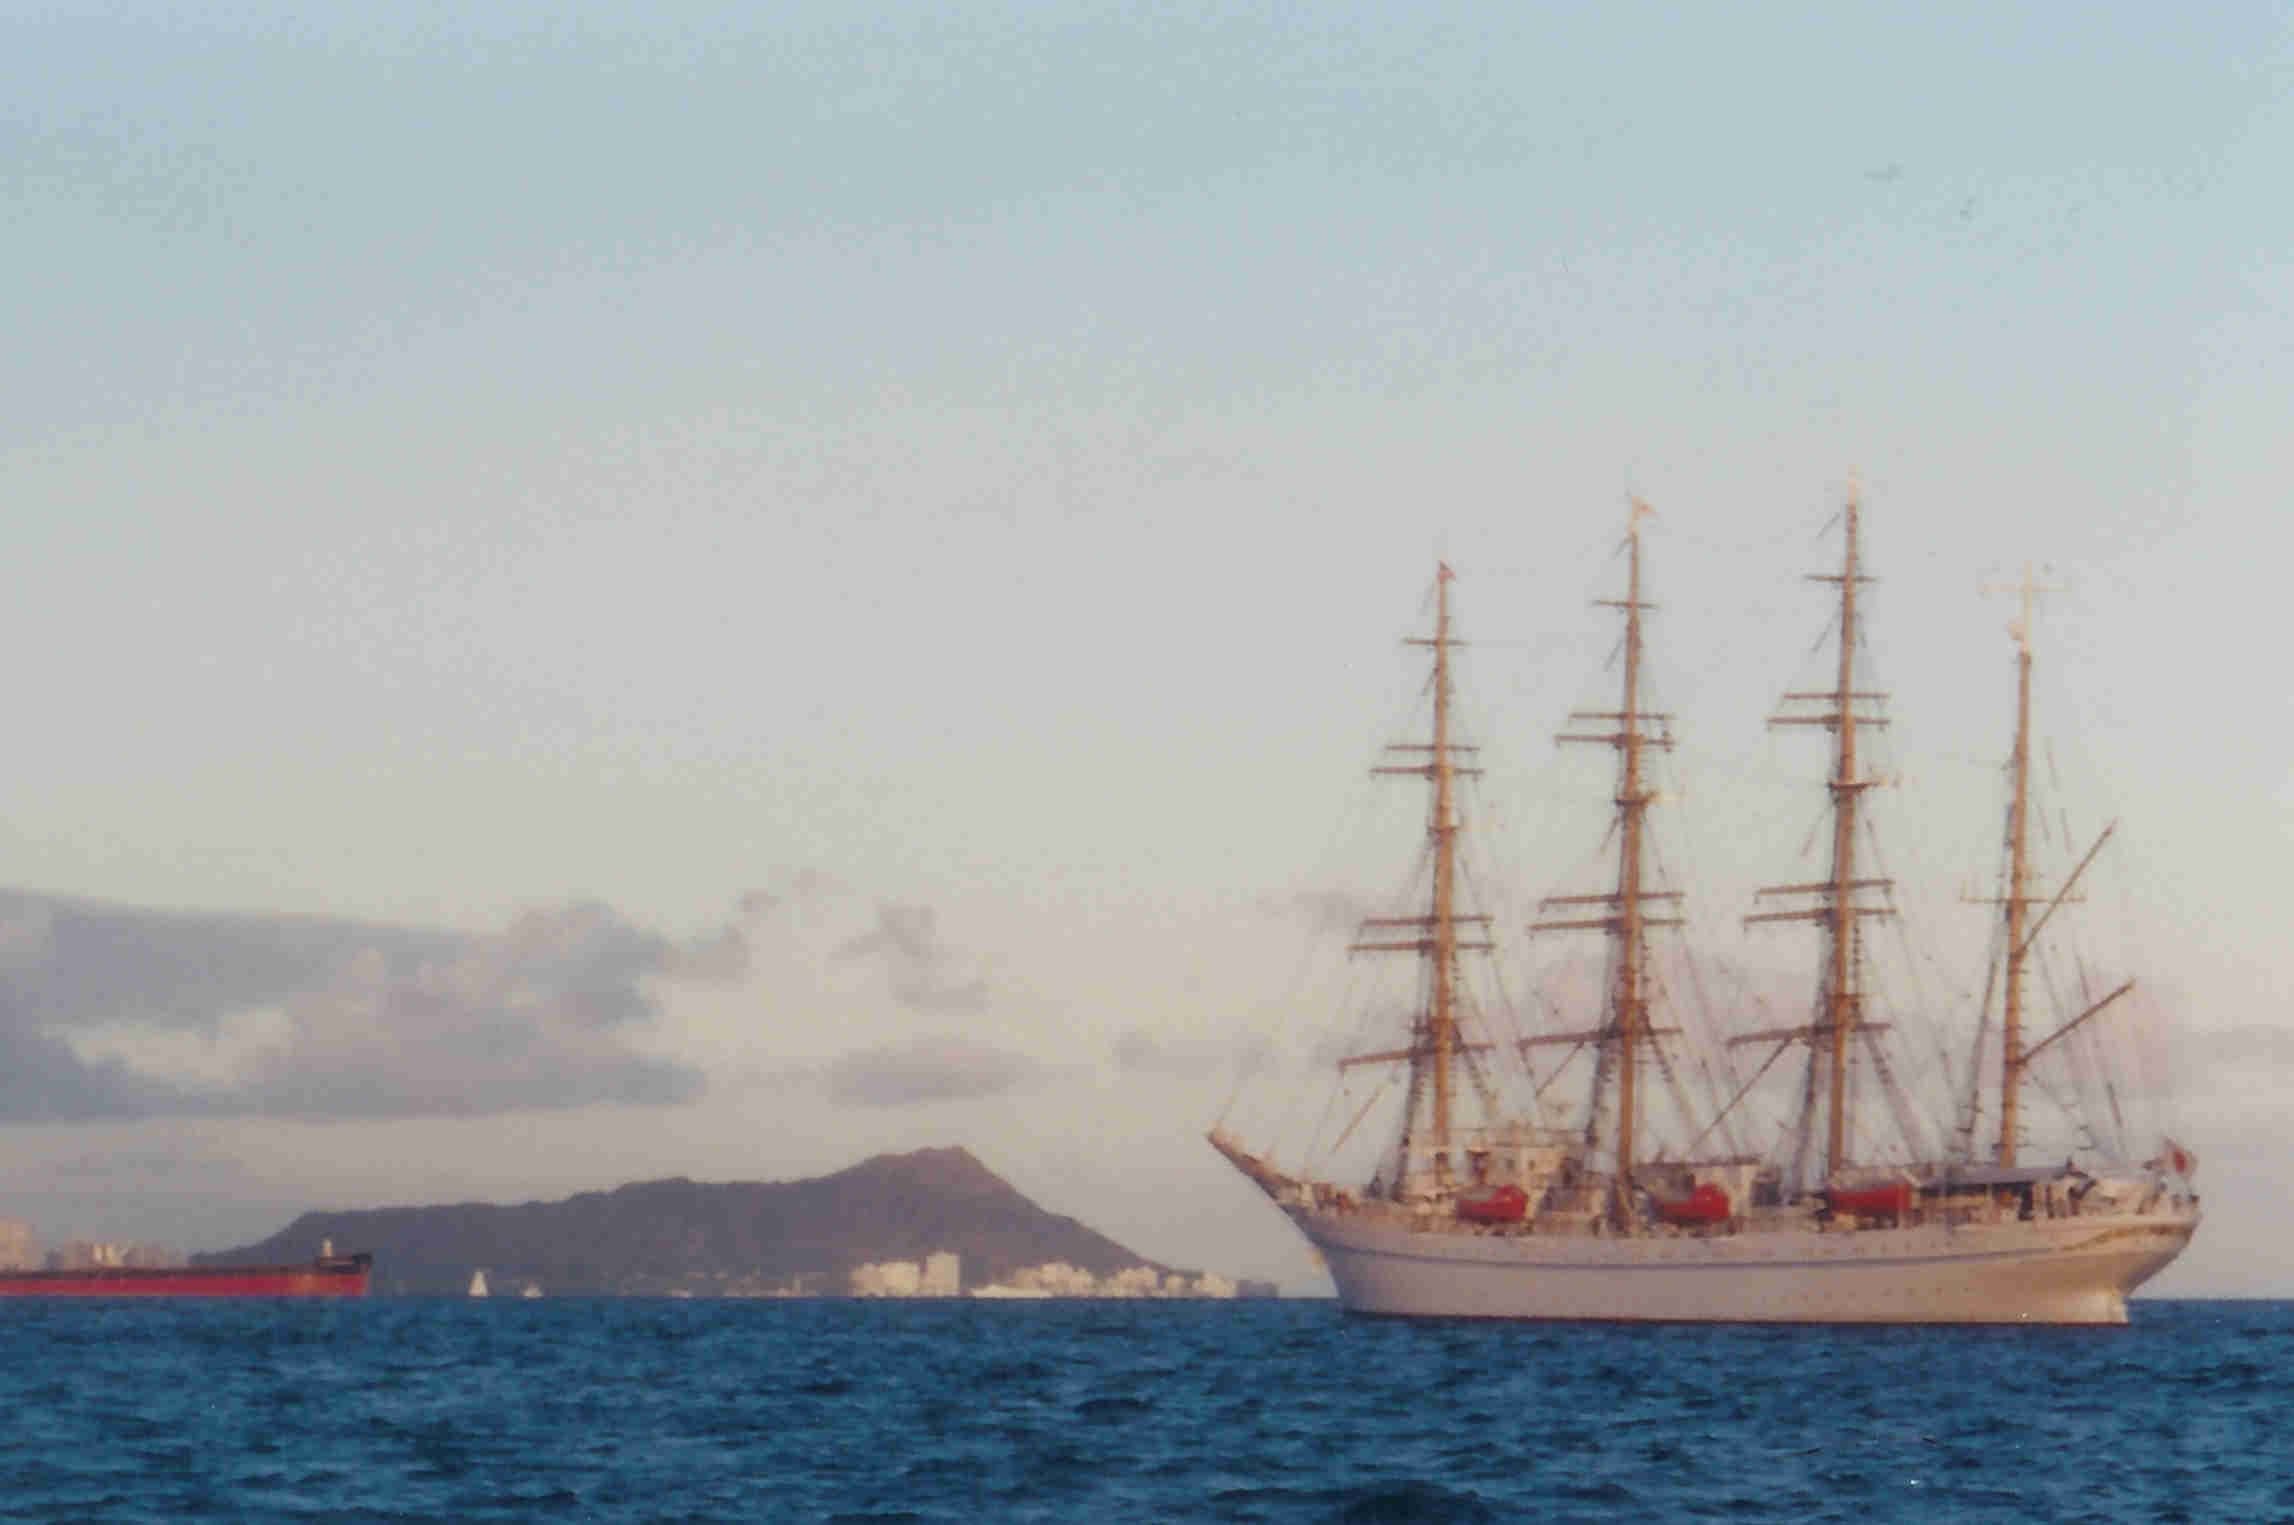 Tall Ship coming into Port of Honolulu